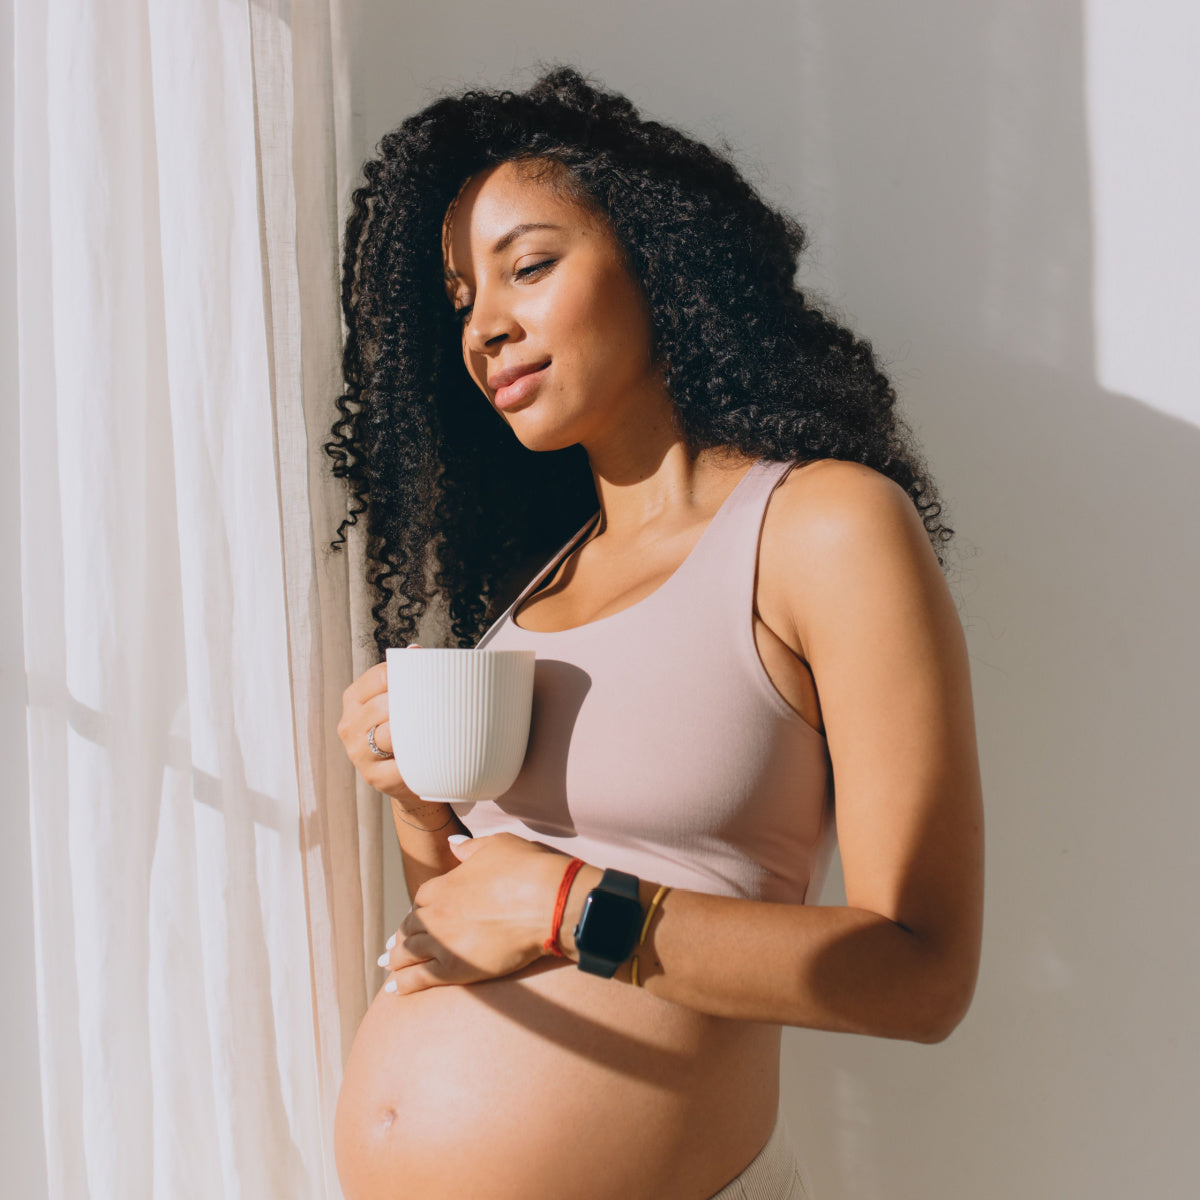 Coffee and Pregnancy: Finding the Balance Between Enjoyment, Safety, and Heartburn Prevention